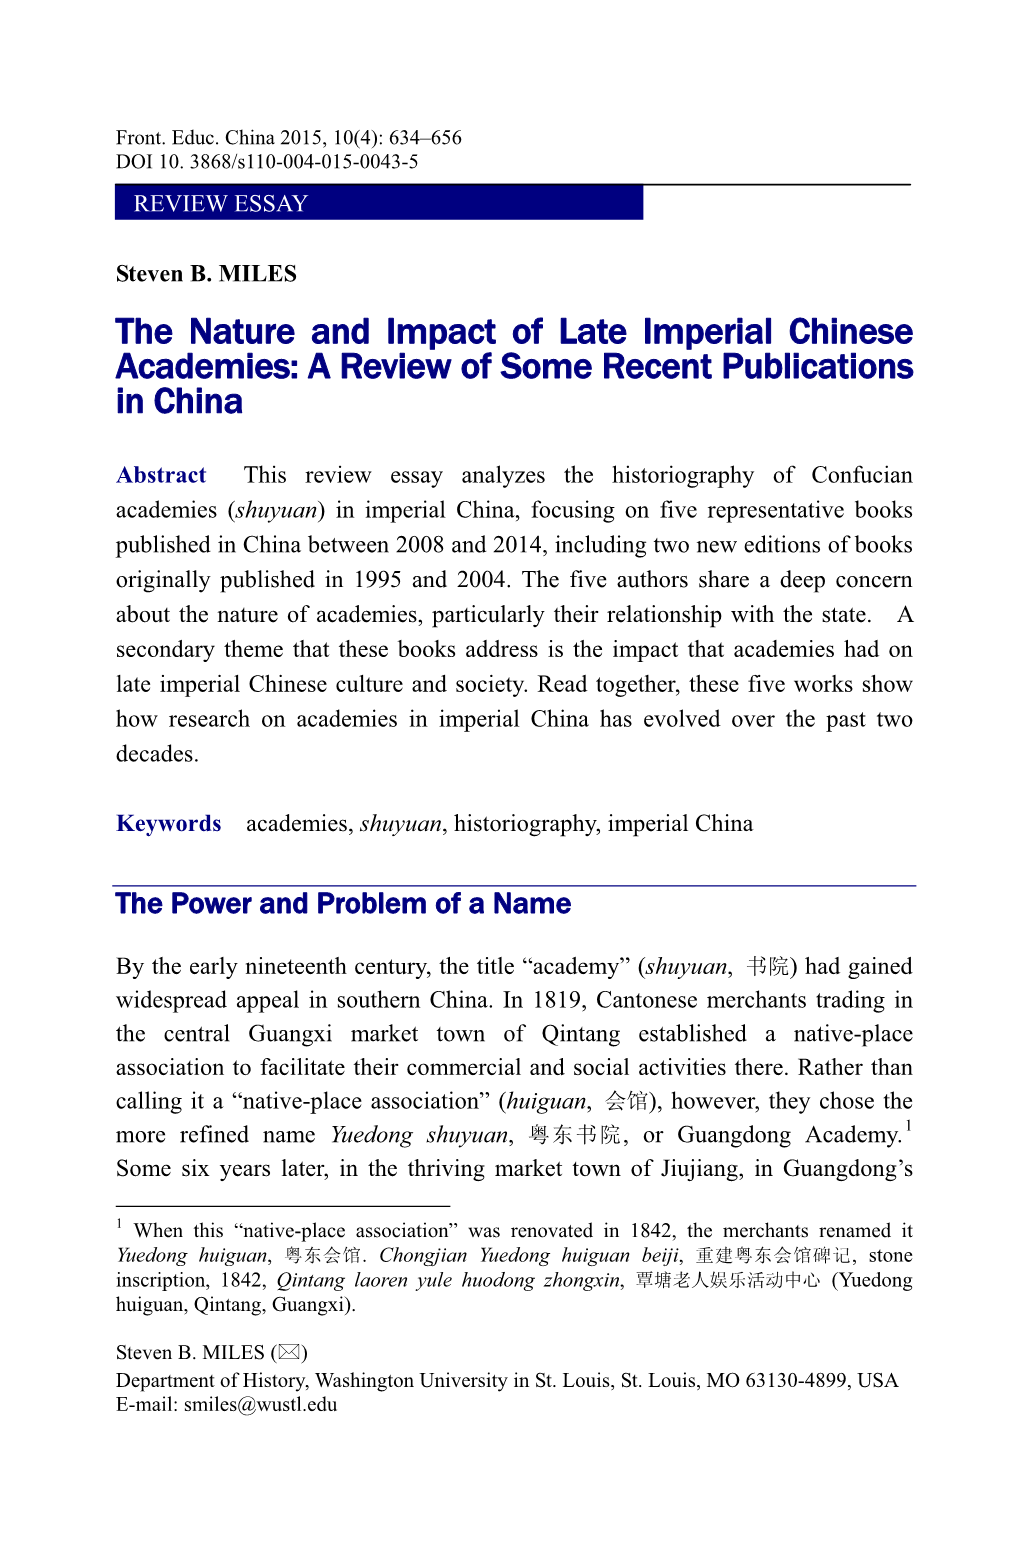 The Nature and Impact of Late Imperial Chinese Academies: a Review of Some Recent Publications in China